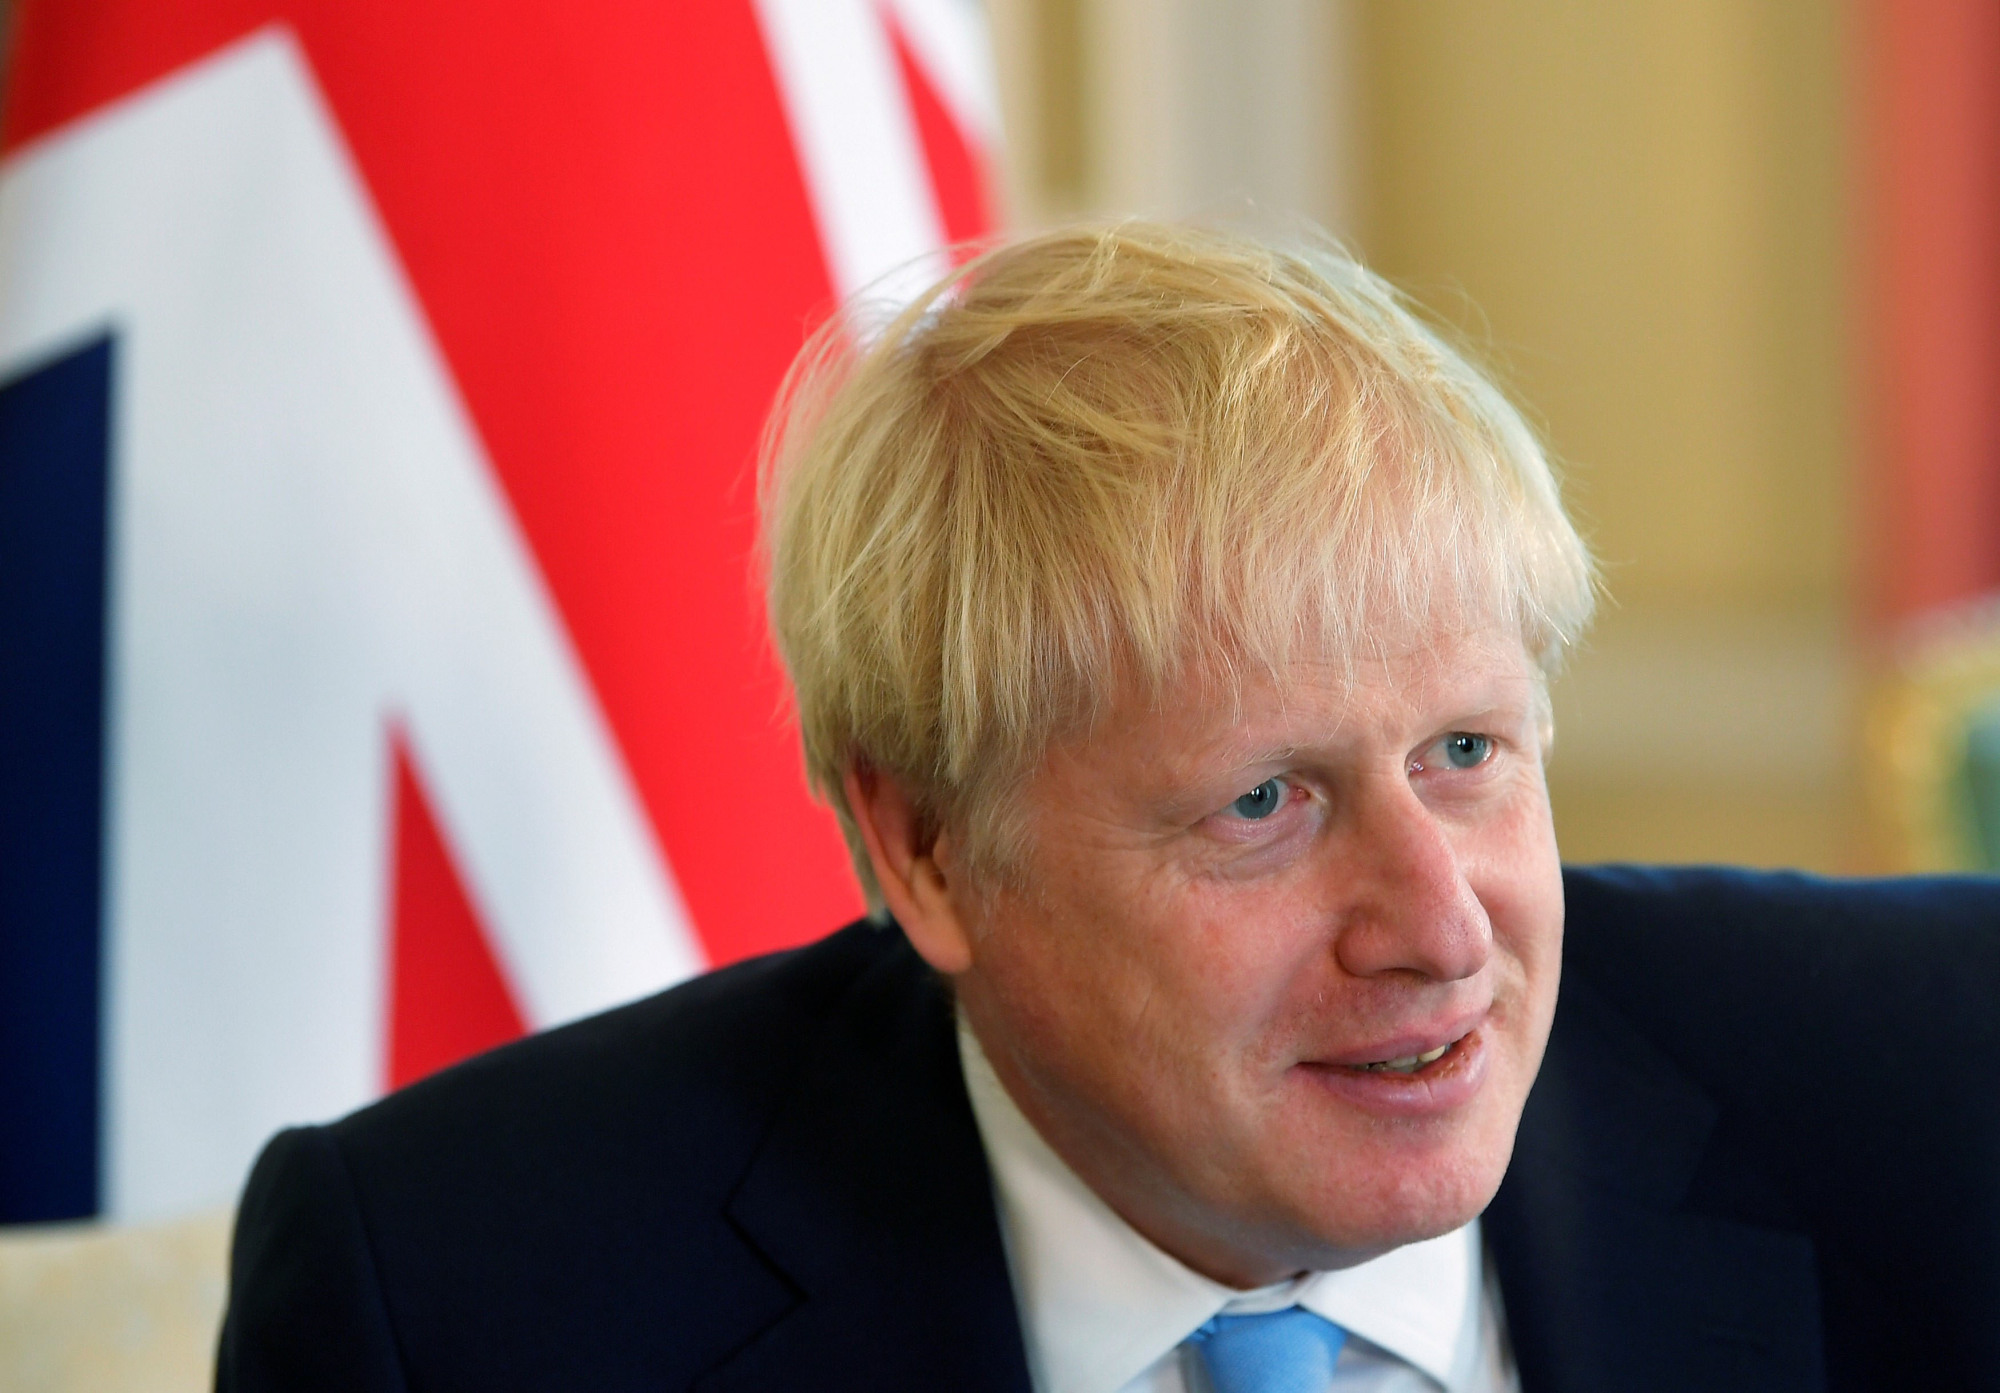 Boris Johnson becomes Britain's new prime minister - Pars Today